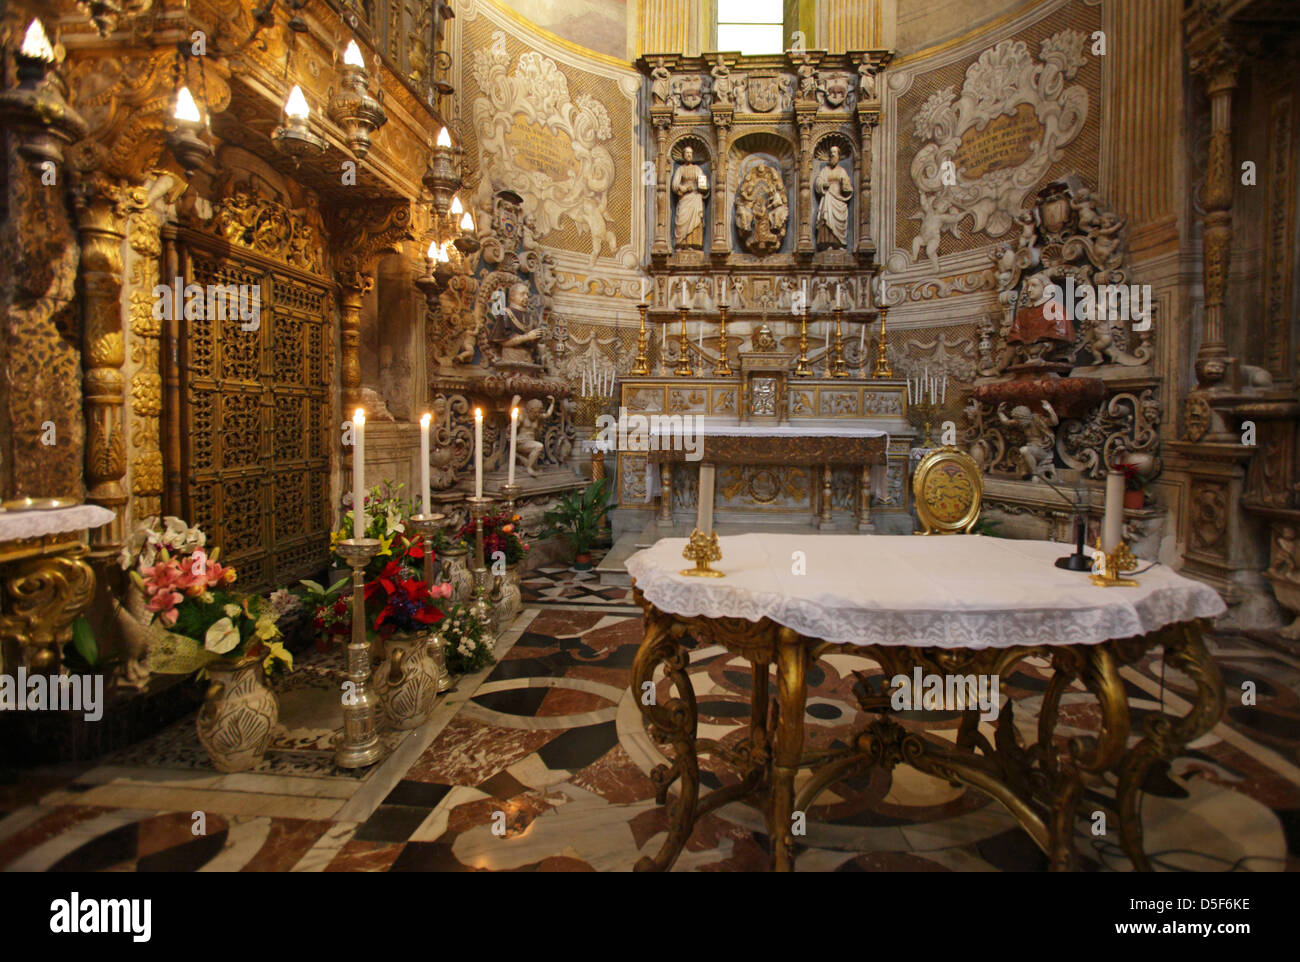 Chapel of Saint Agatha in the Cathedral of Catania, Sicily, Italy Stock Photo